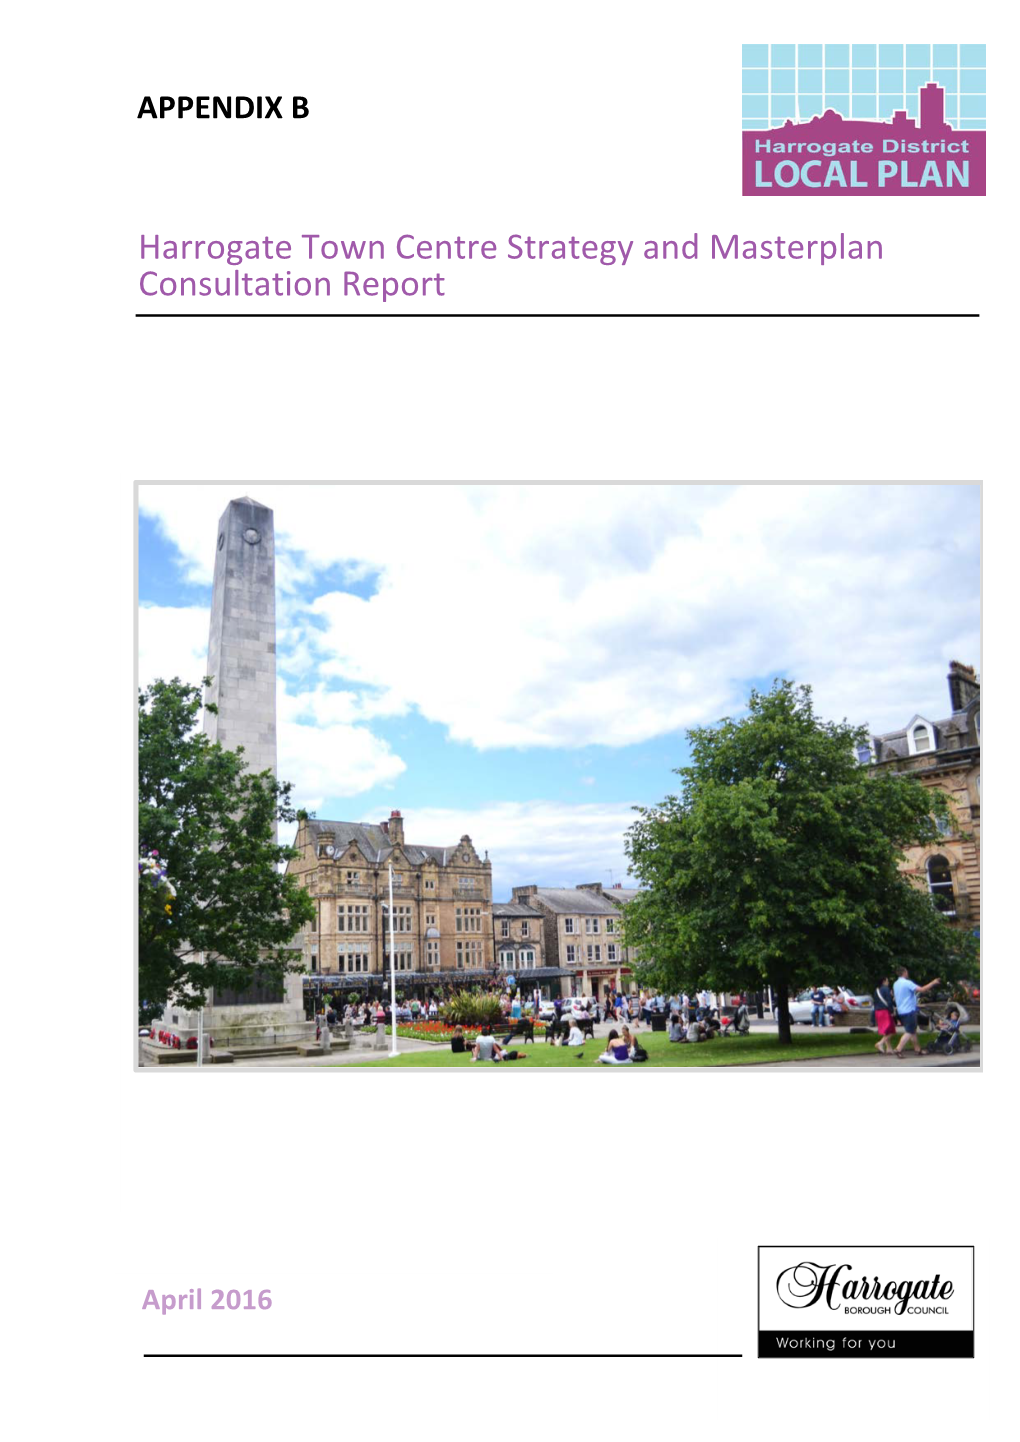 Harrogate Town Centre Strategy and Masterplan Consultation Report